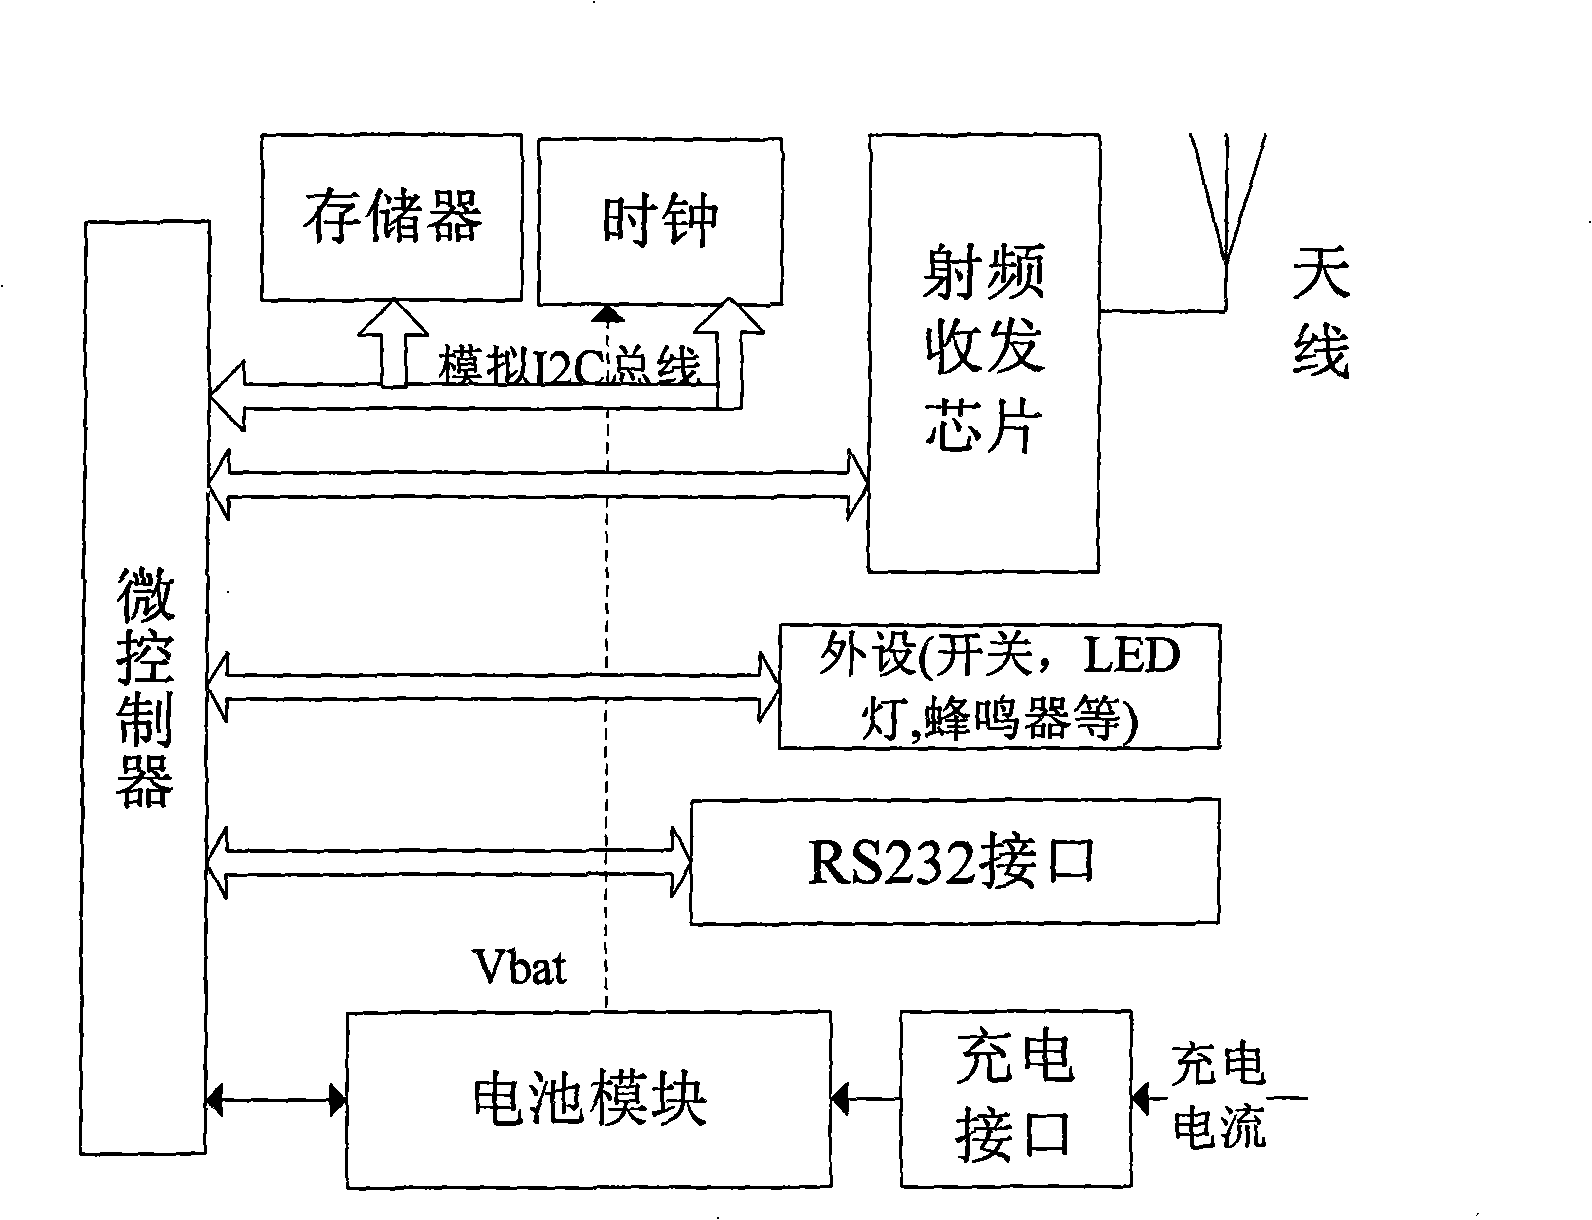 Low-power consumption handhold RFID patrol apparatus as well as method for implementing low-power consumption